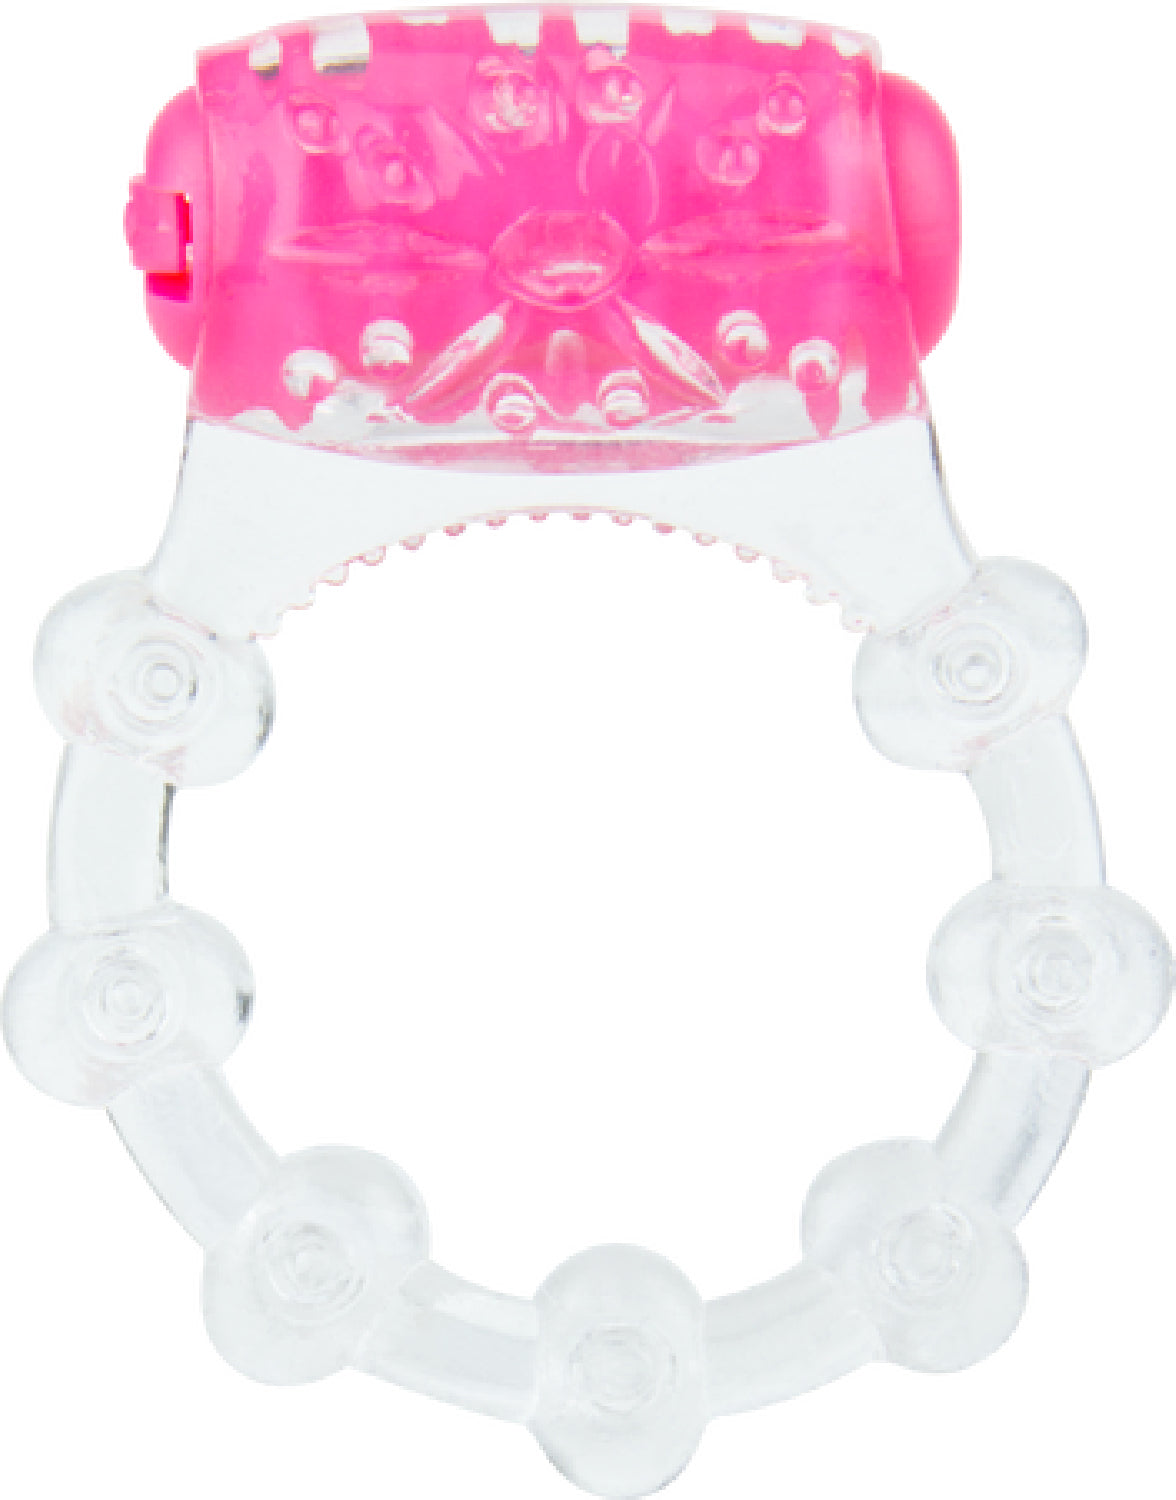 ColorPoP Quickie Vibrating Ring - Pink